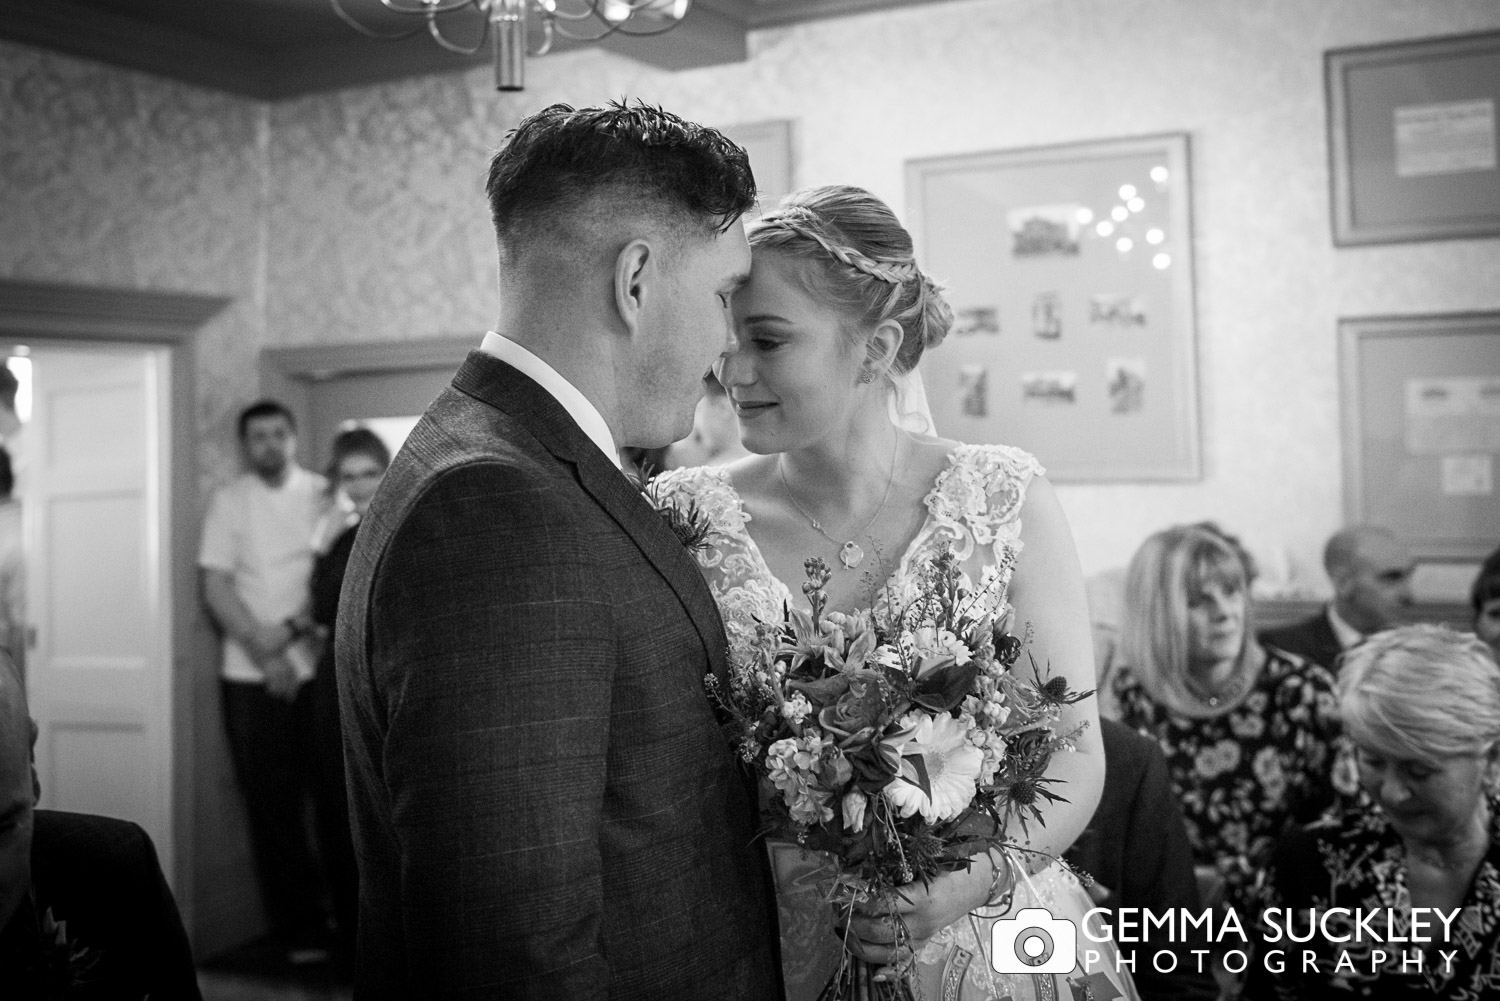 an intimate moment of a bride and groom during their ceremony at grassington house